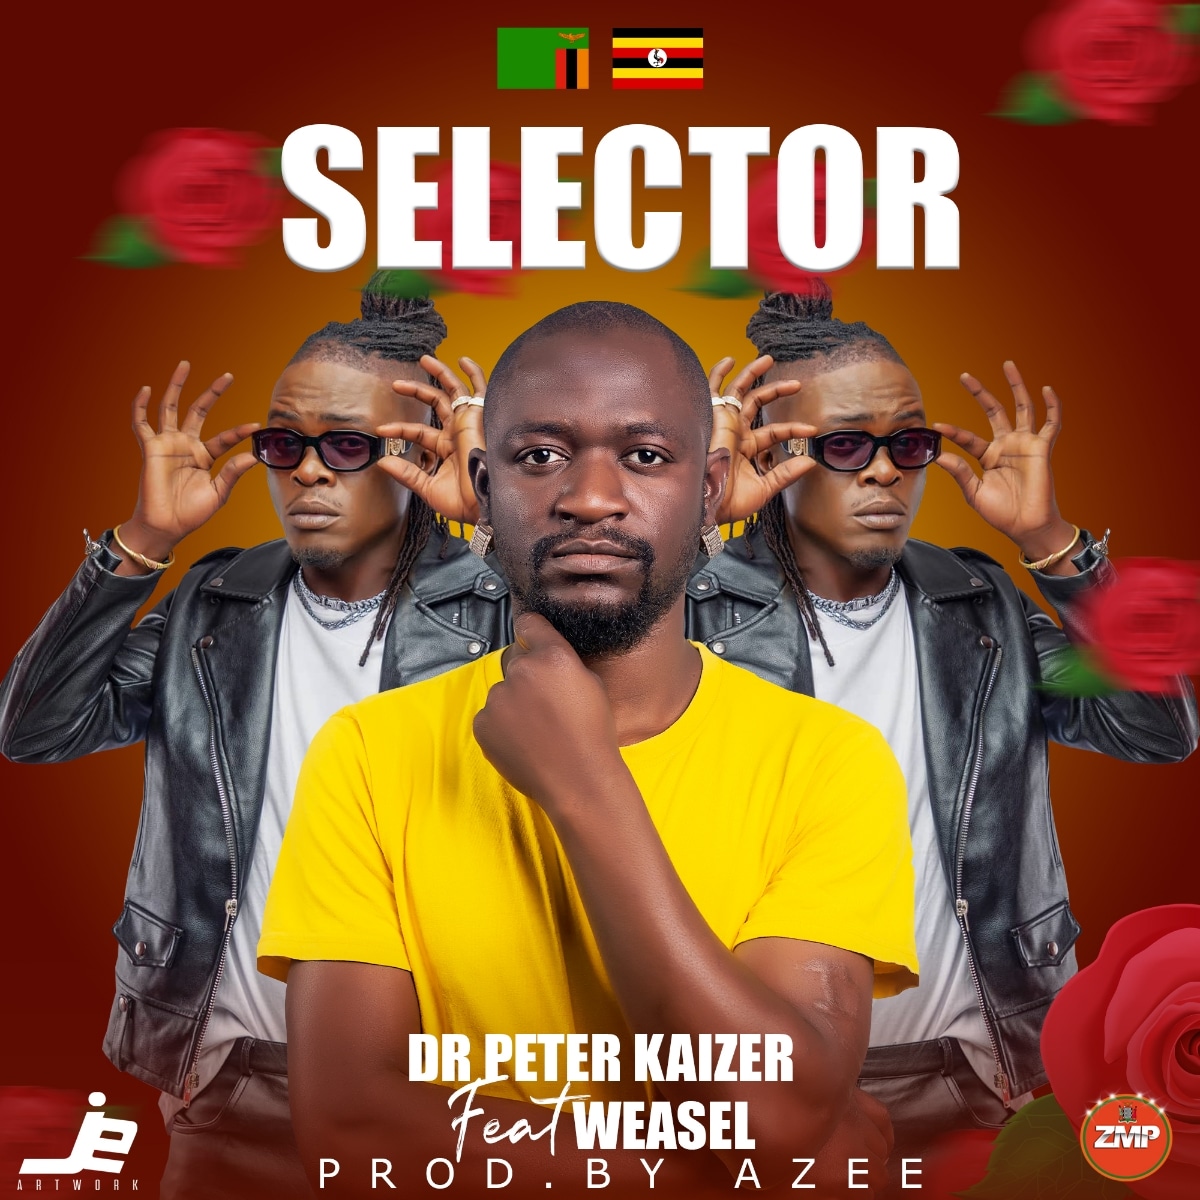 DOWNLOAD: Dr Peter Kaizer Ft Weasel – “Selector” Mp3